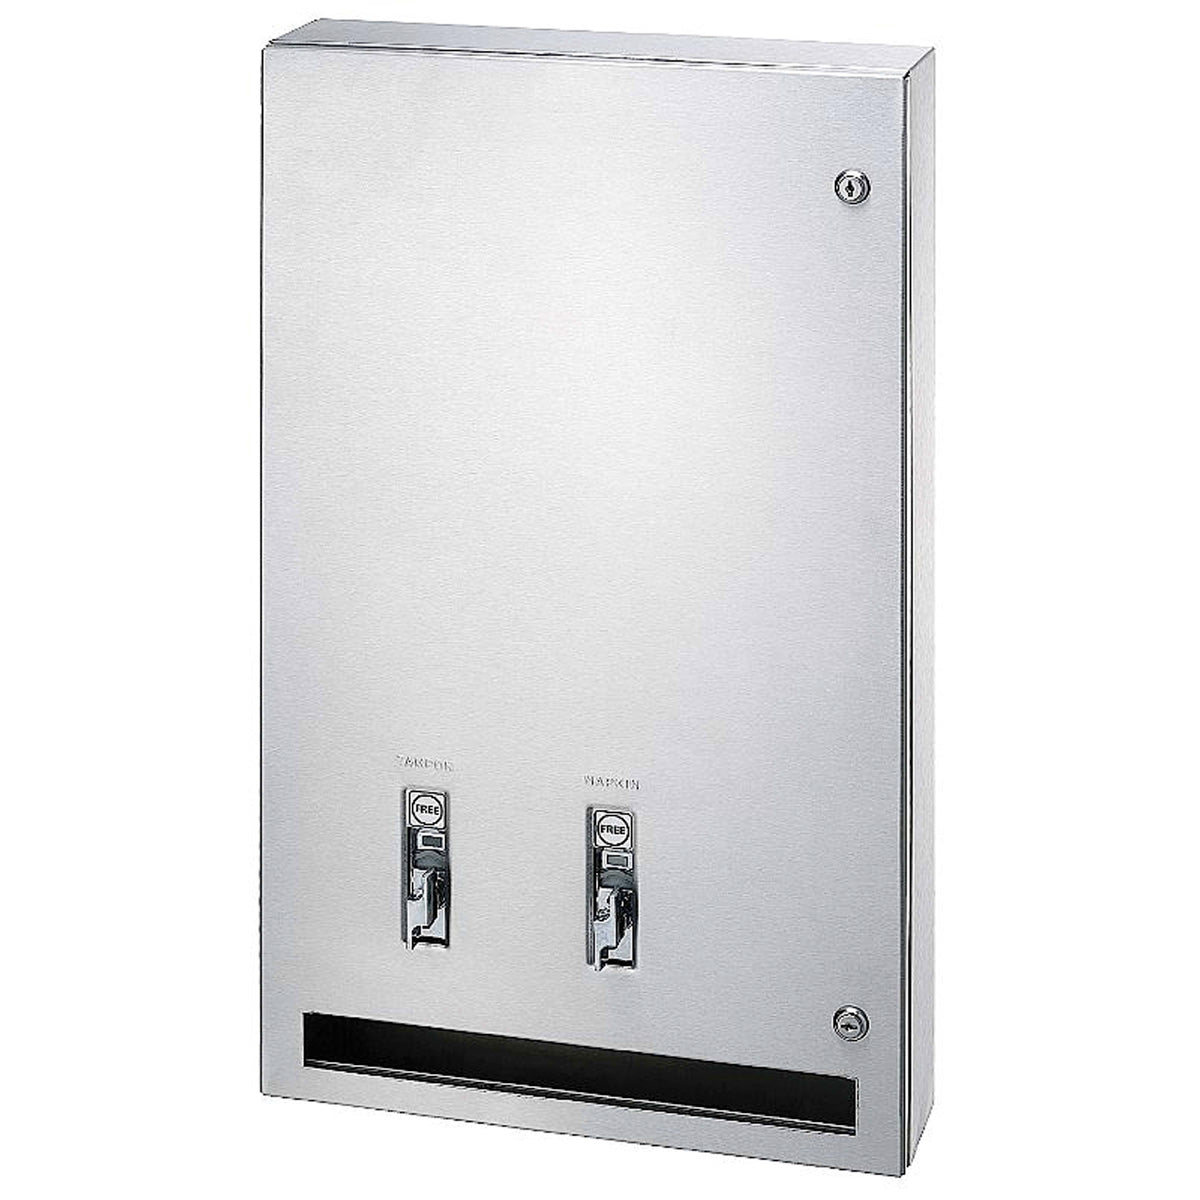 Bradley 407-45 Commercial Restroom Sanitary Napkin/ Tampon Dispenser, Recessed-Mounted, Stainless Steel